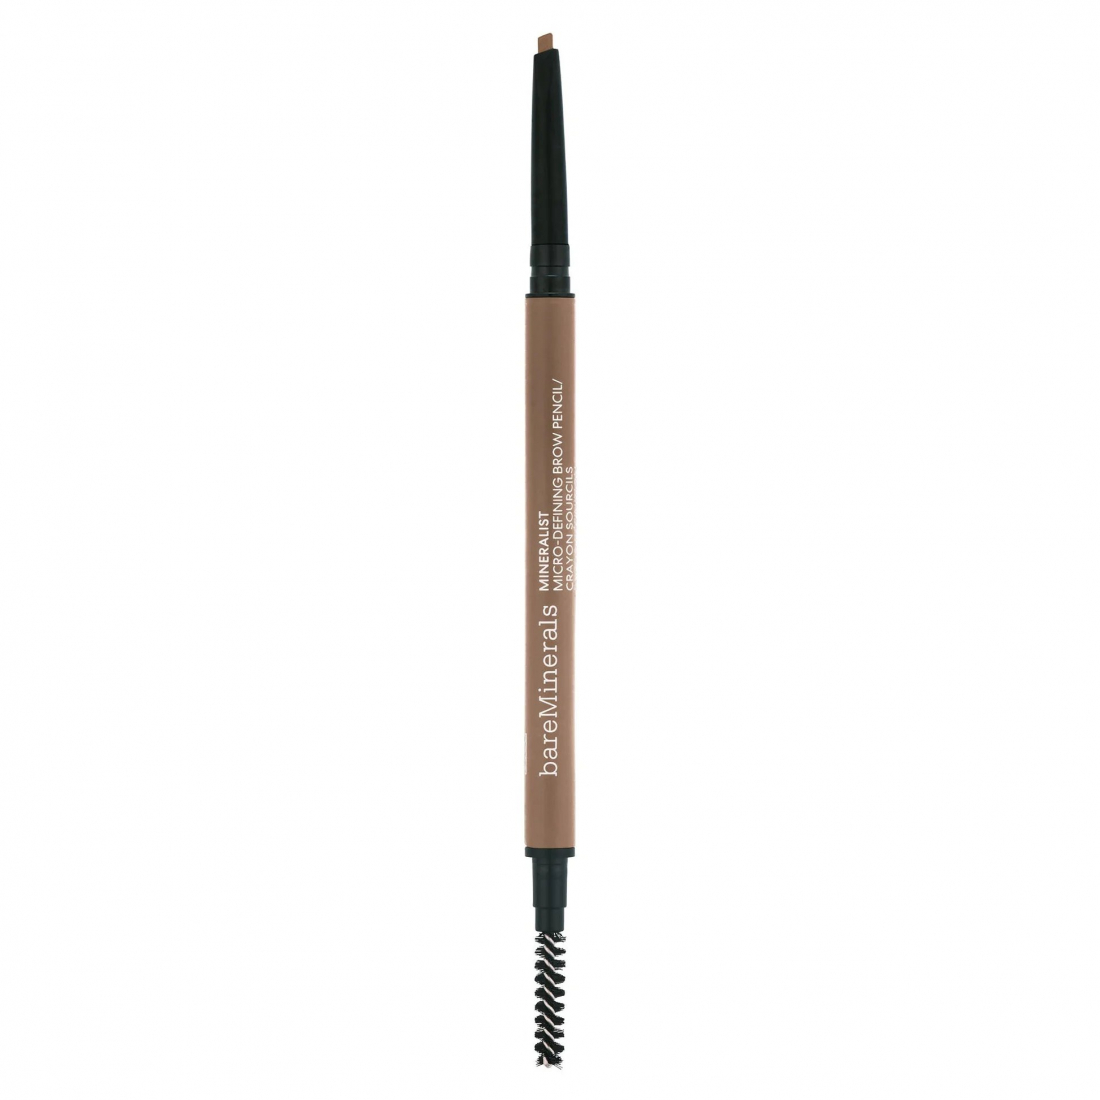 'Mineralist Micro-Defining' Eyebrow Pencil - Taupe